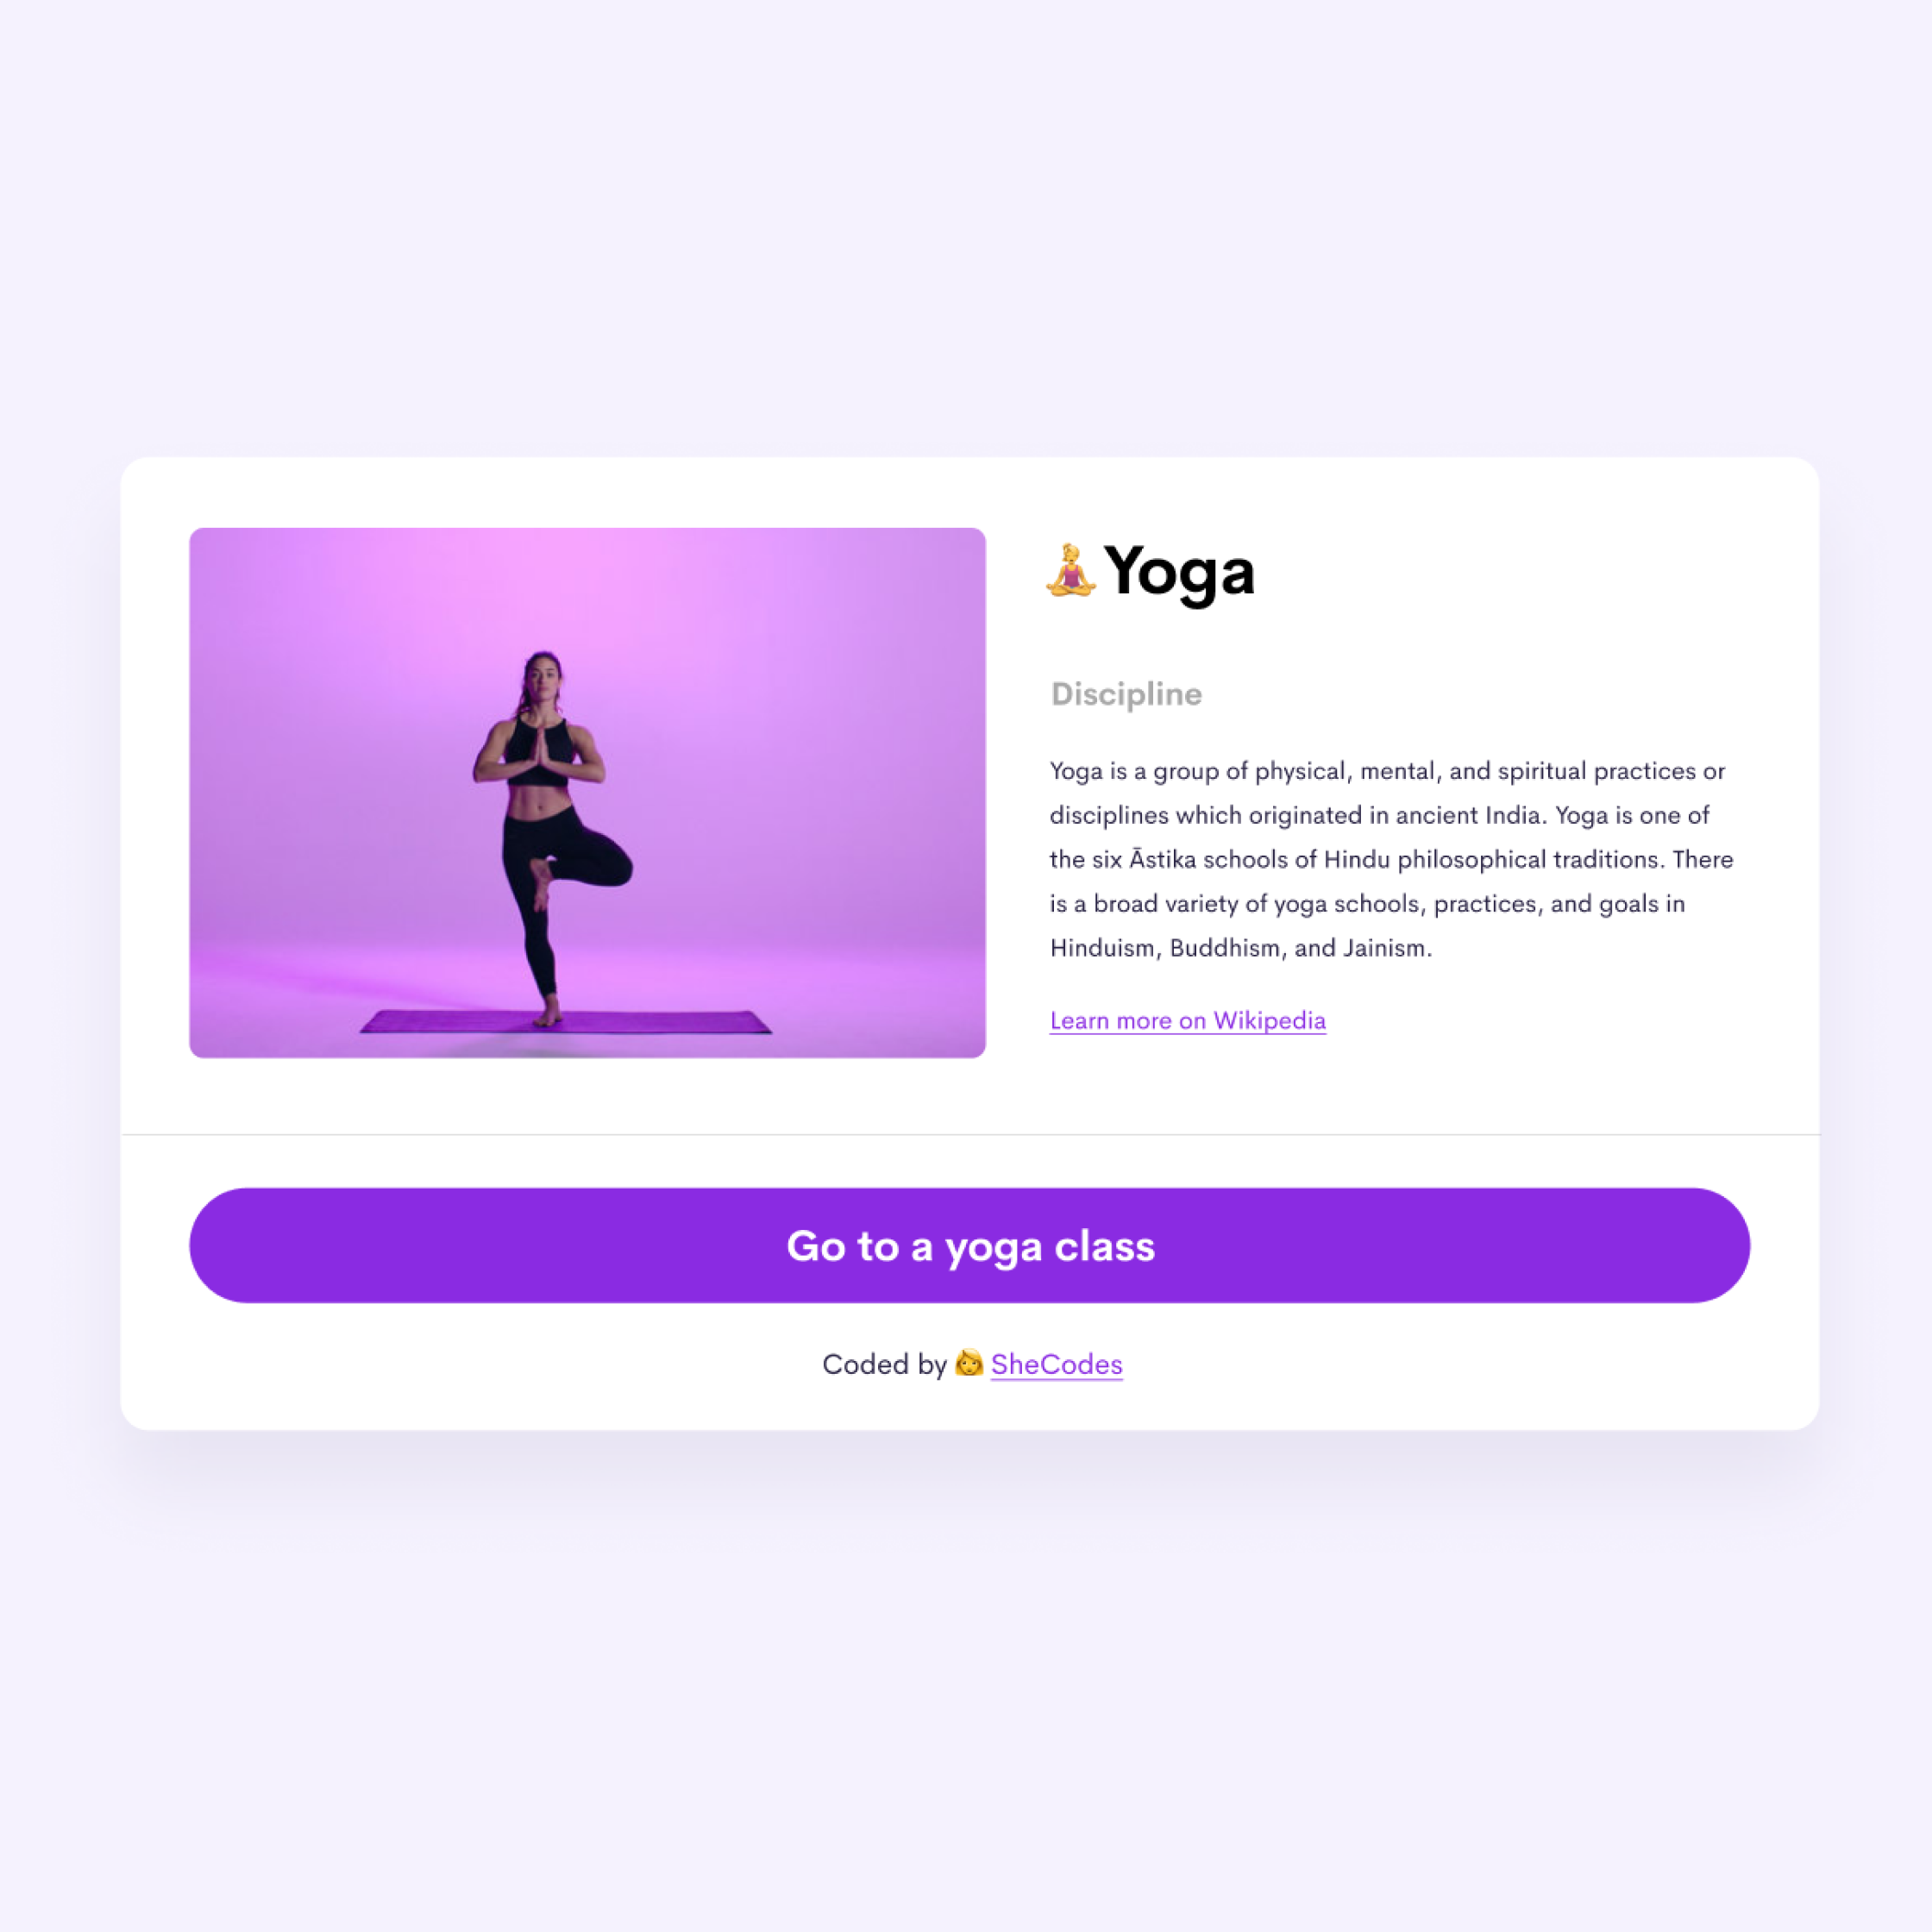 An image of the yoga app project